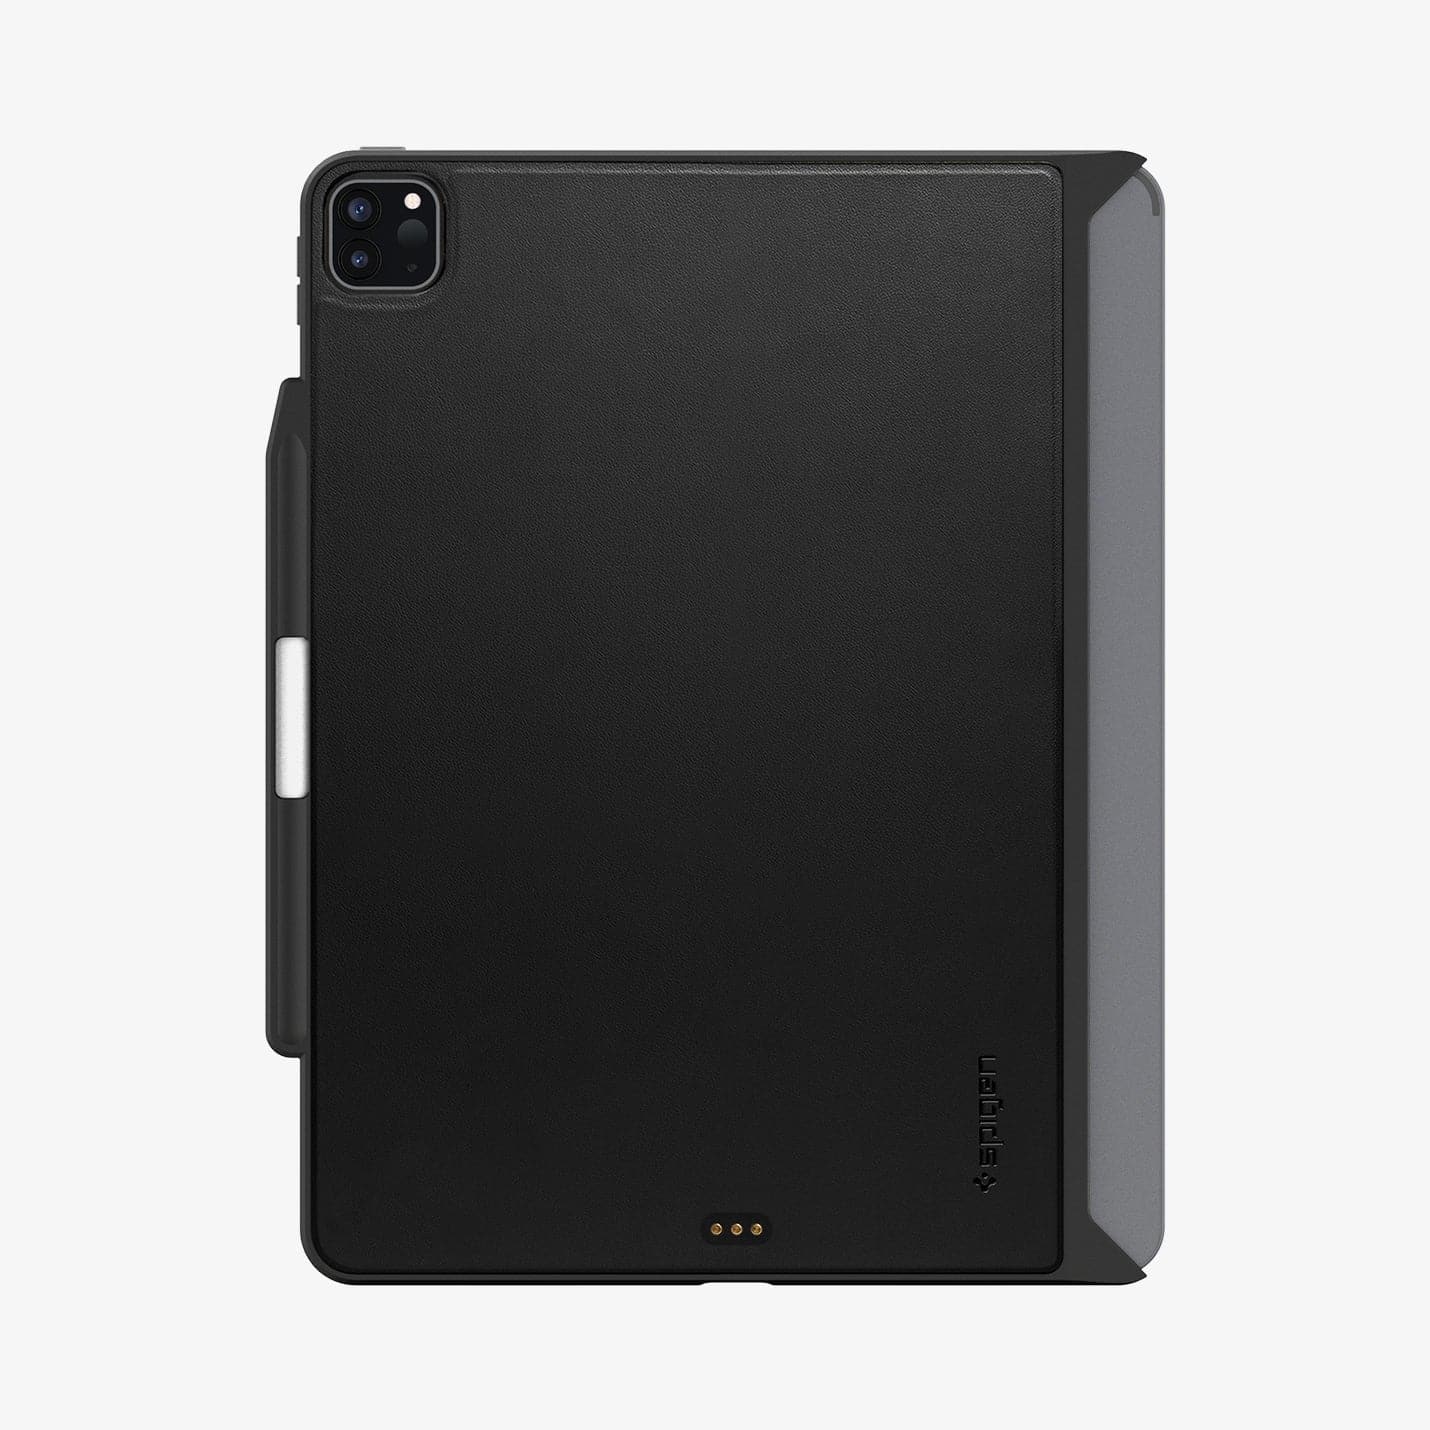 ACS05468 - iPad Pro 12.9" Case Thin Fit Pro in black showing the back